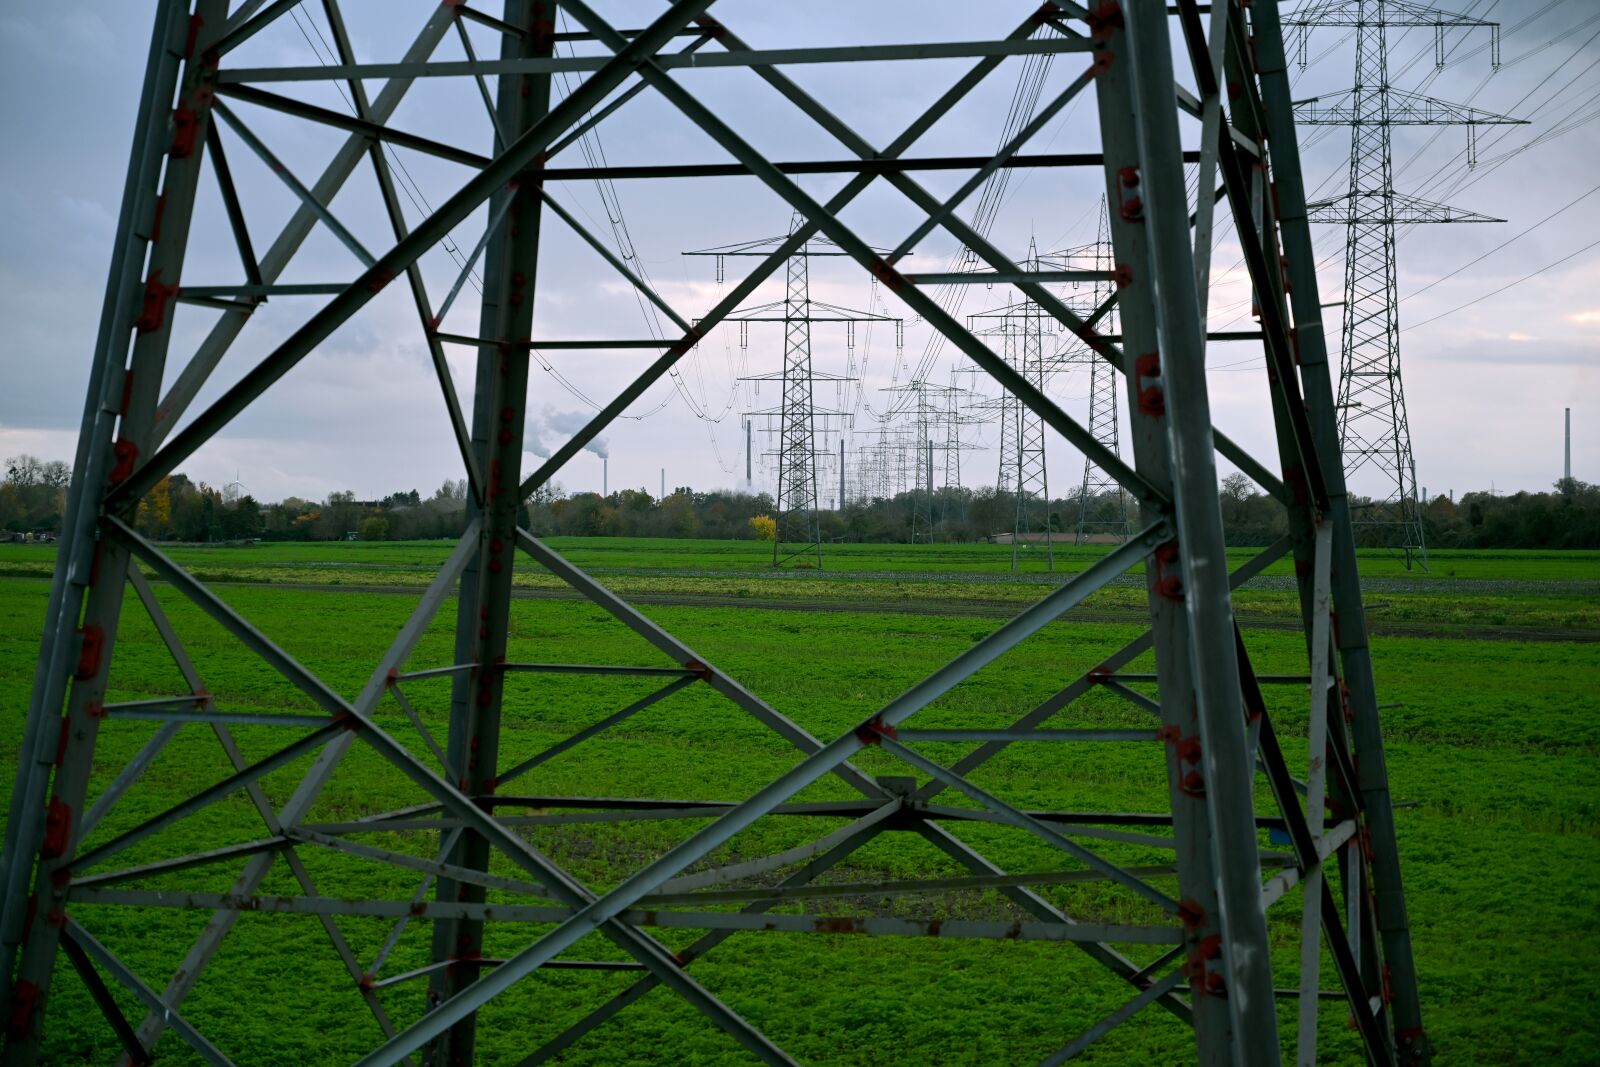 Nikon Z7 sample photo. Current, power poles, industry photography